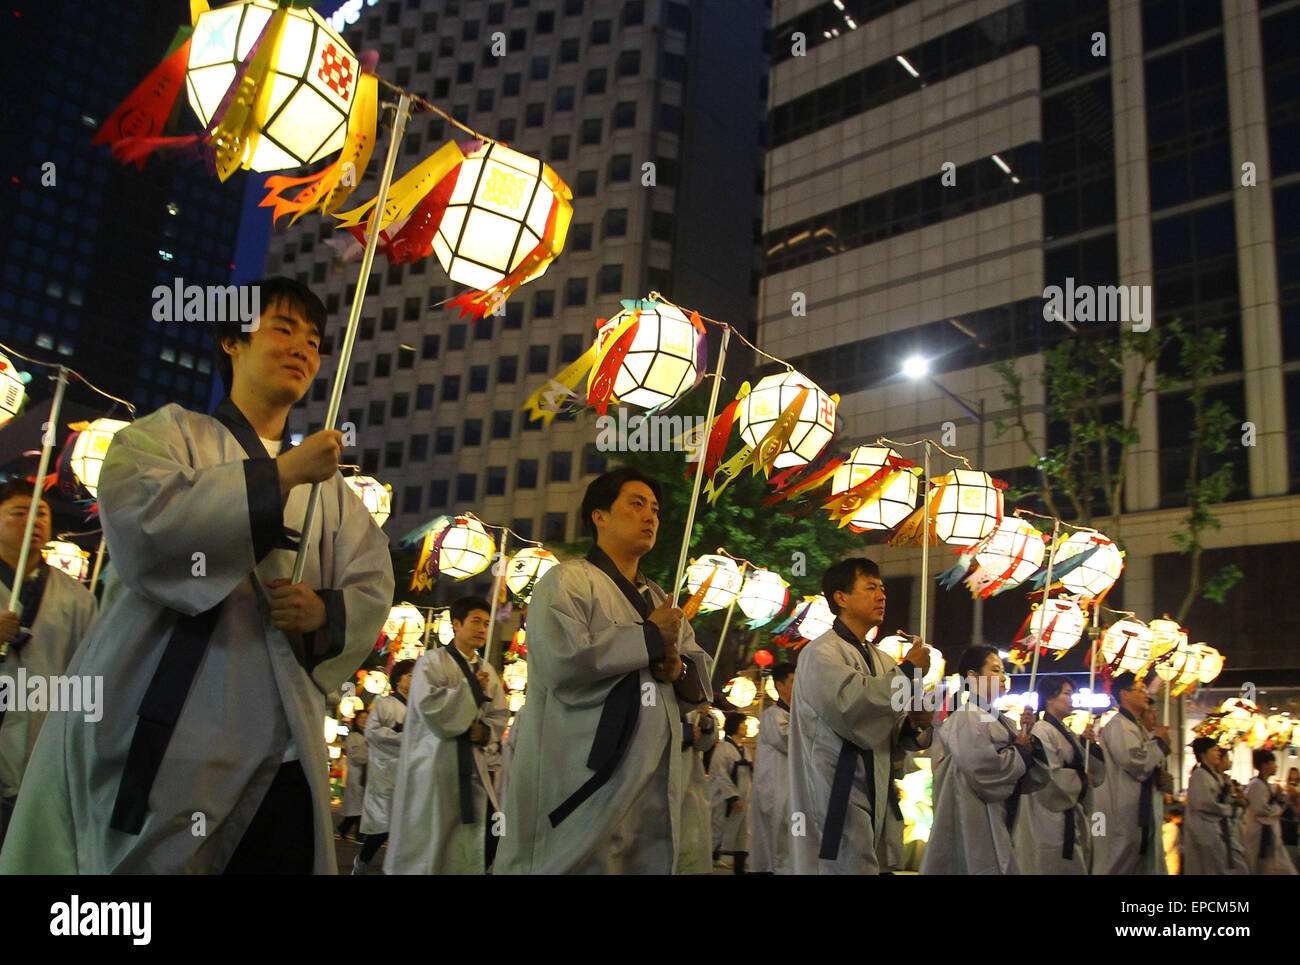 Seoul, South Korea. 16th May, 2015. Buddhists take part in a parade during the Lotus Lantern Festival to celebrate the upcoming birthday of Buddha in Seoul, South Korea, May 16, 2015. Credit:  Yao Qilin/Xinhua/Alamy Live News Stock Photo